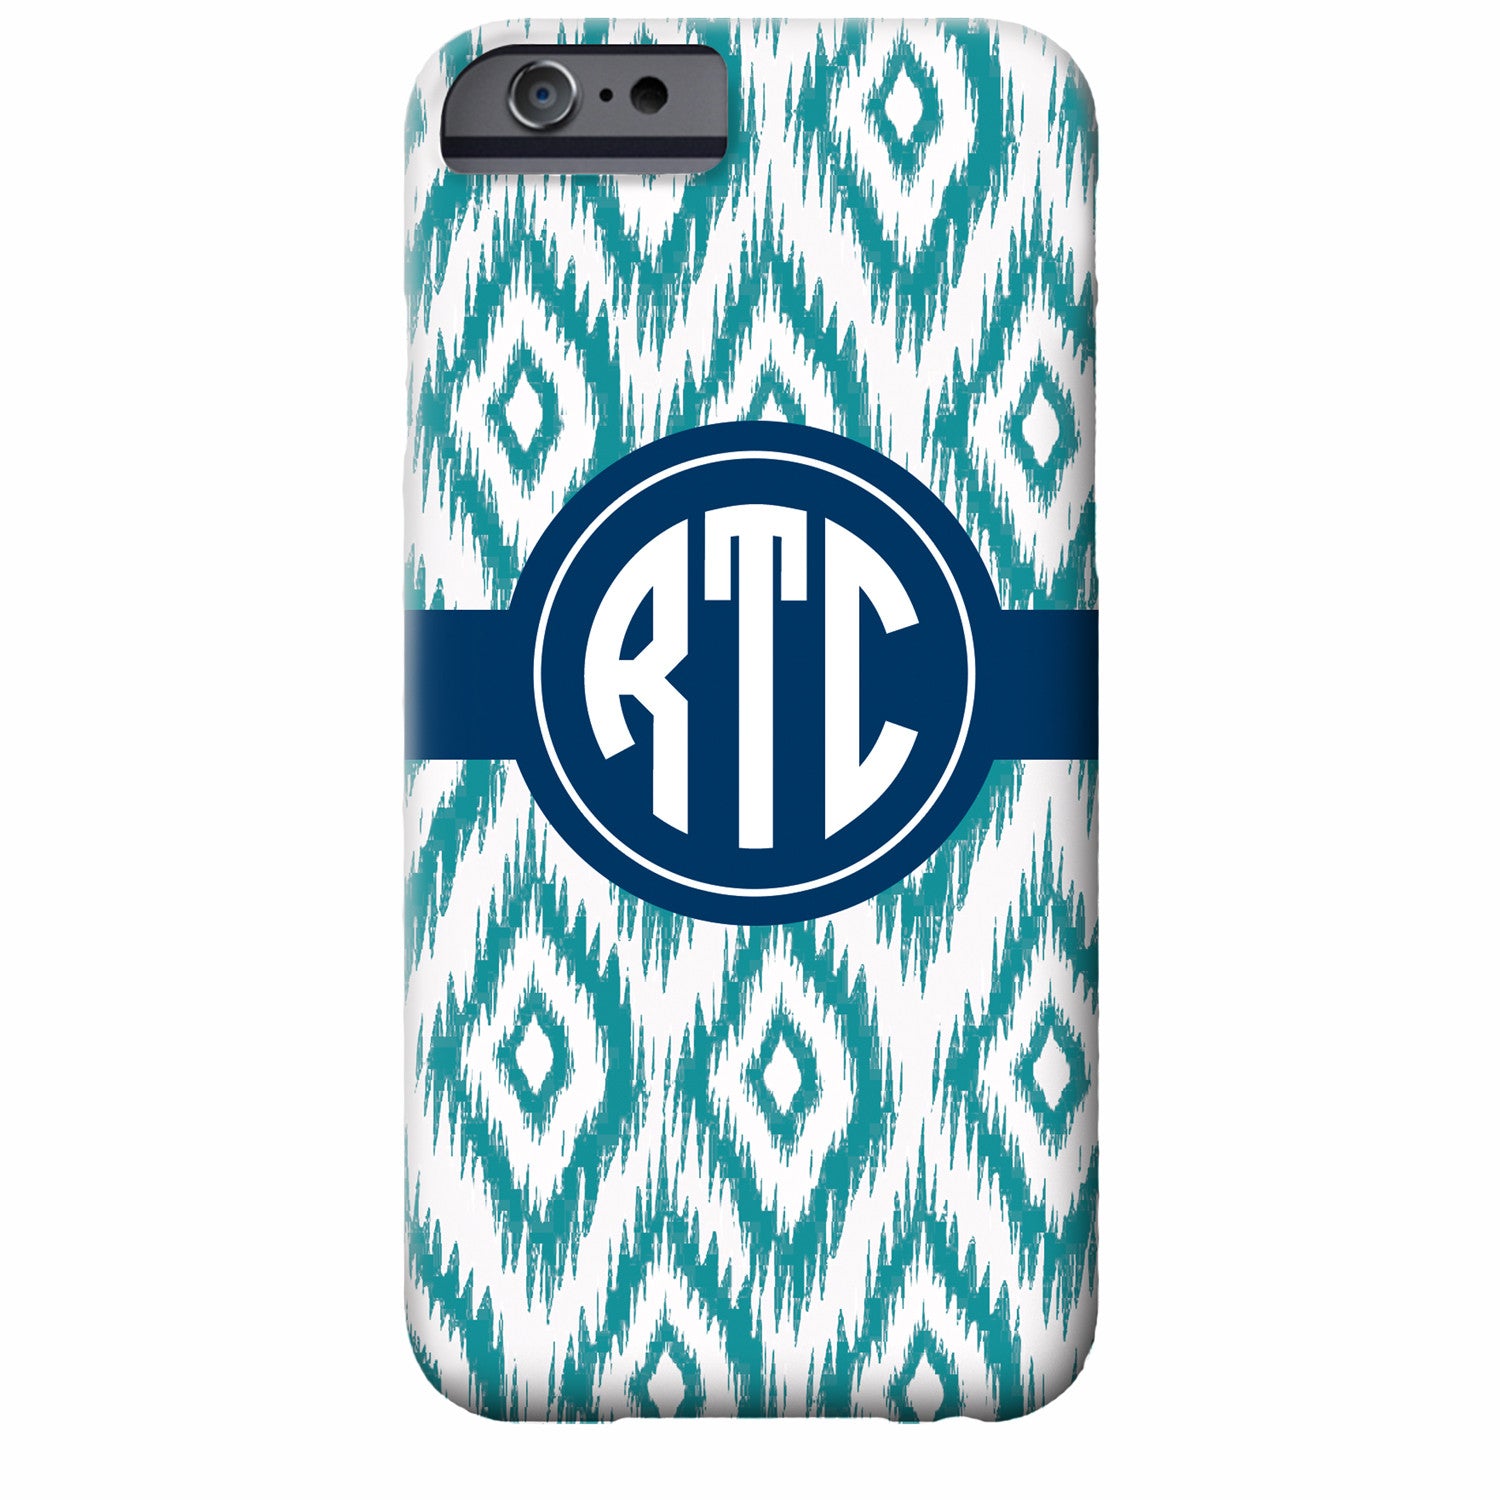 Ikat Monogrammed Cell Phone Case